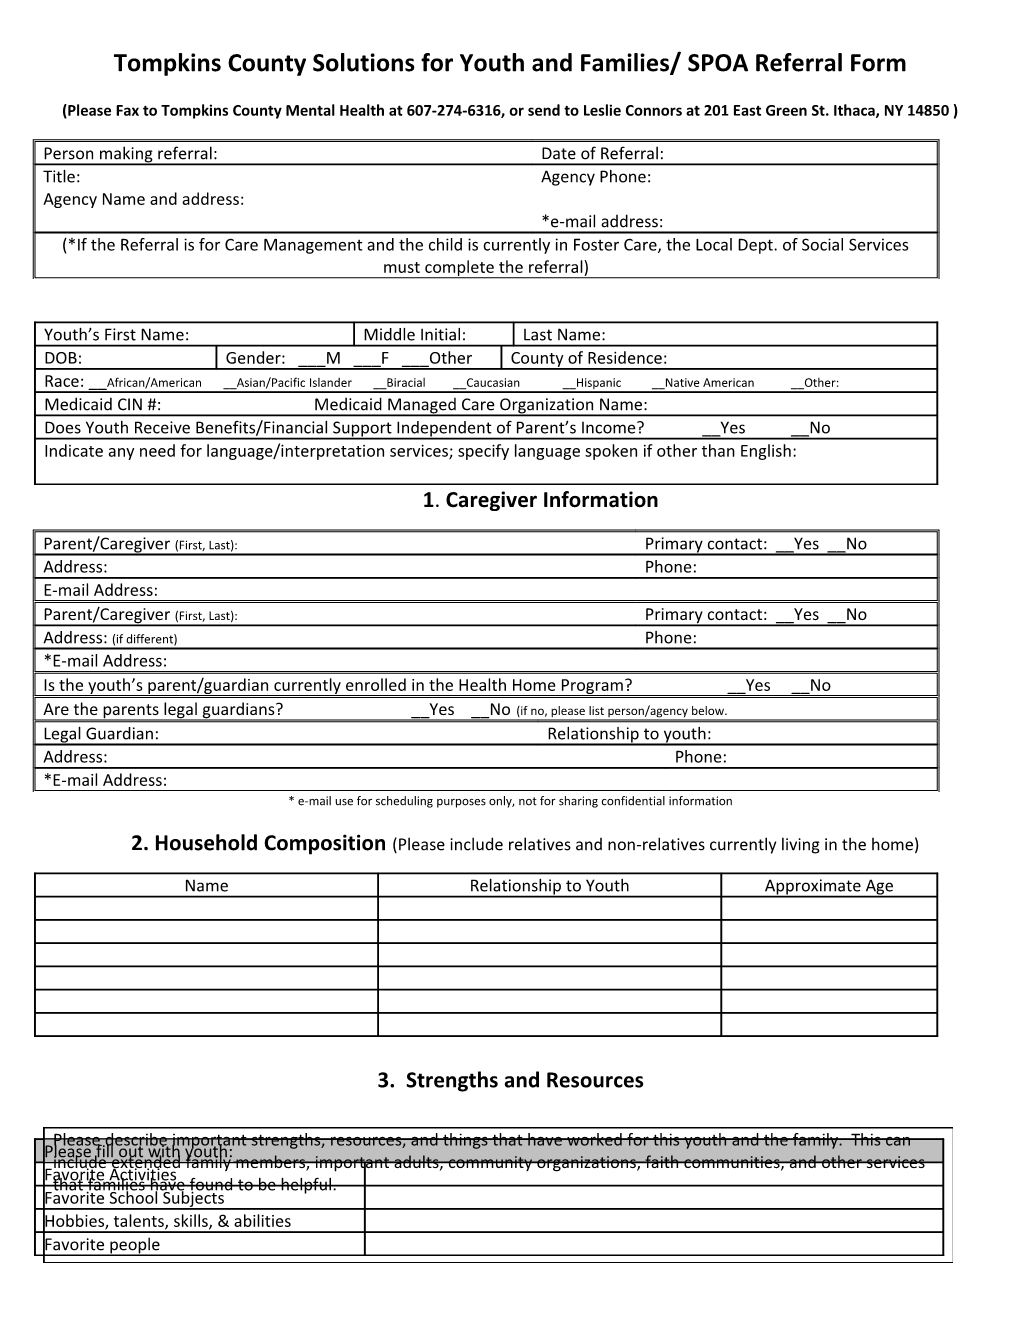 Tompkins County SPOA Universal Referral Form